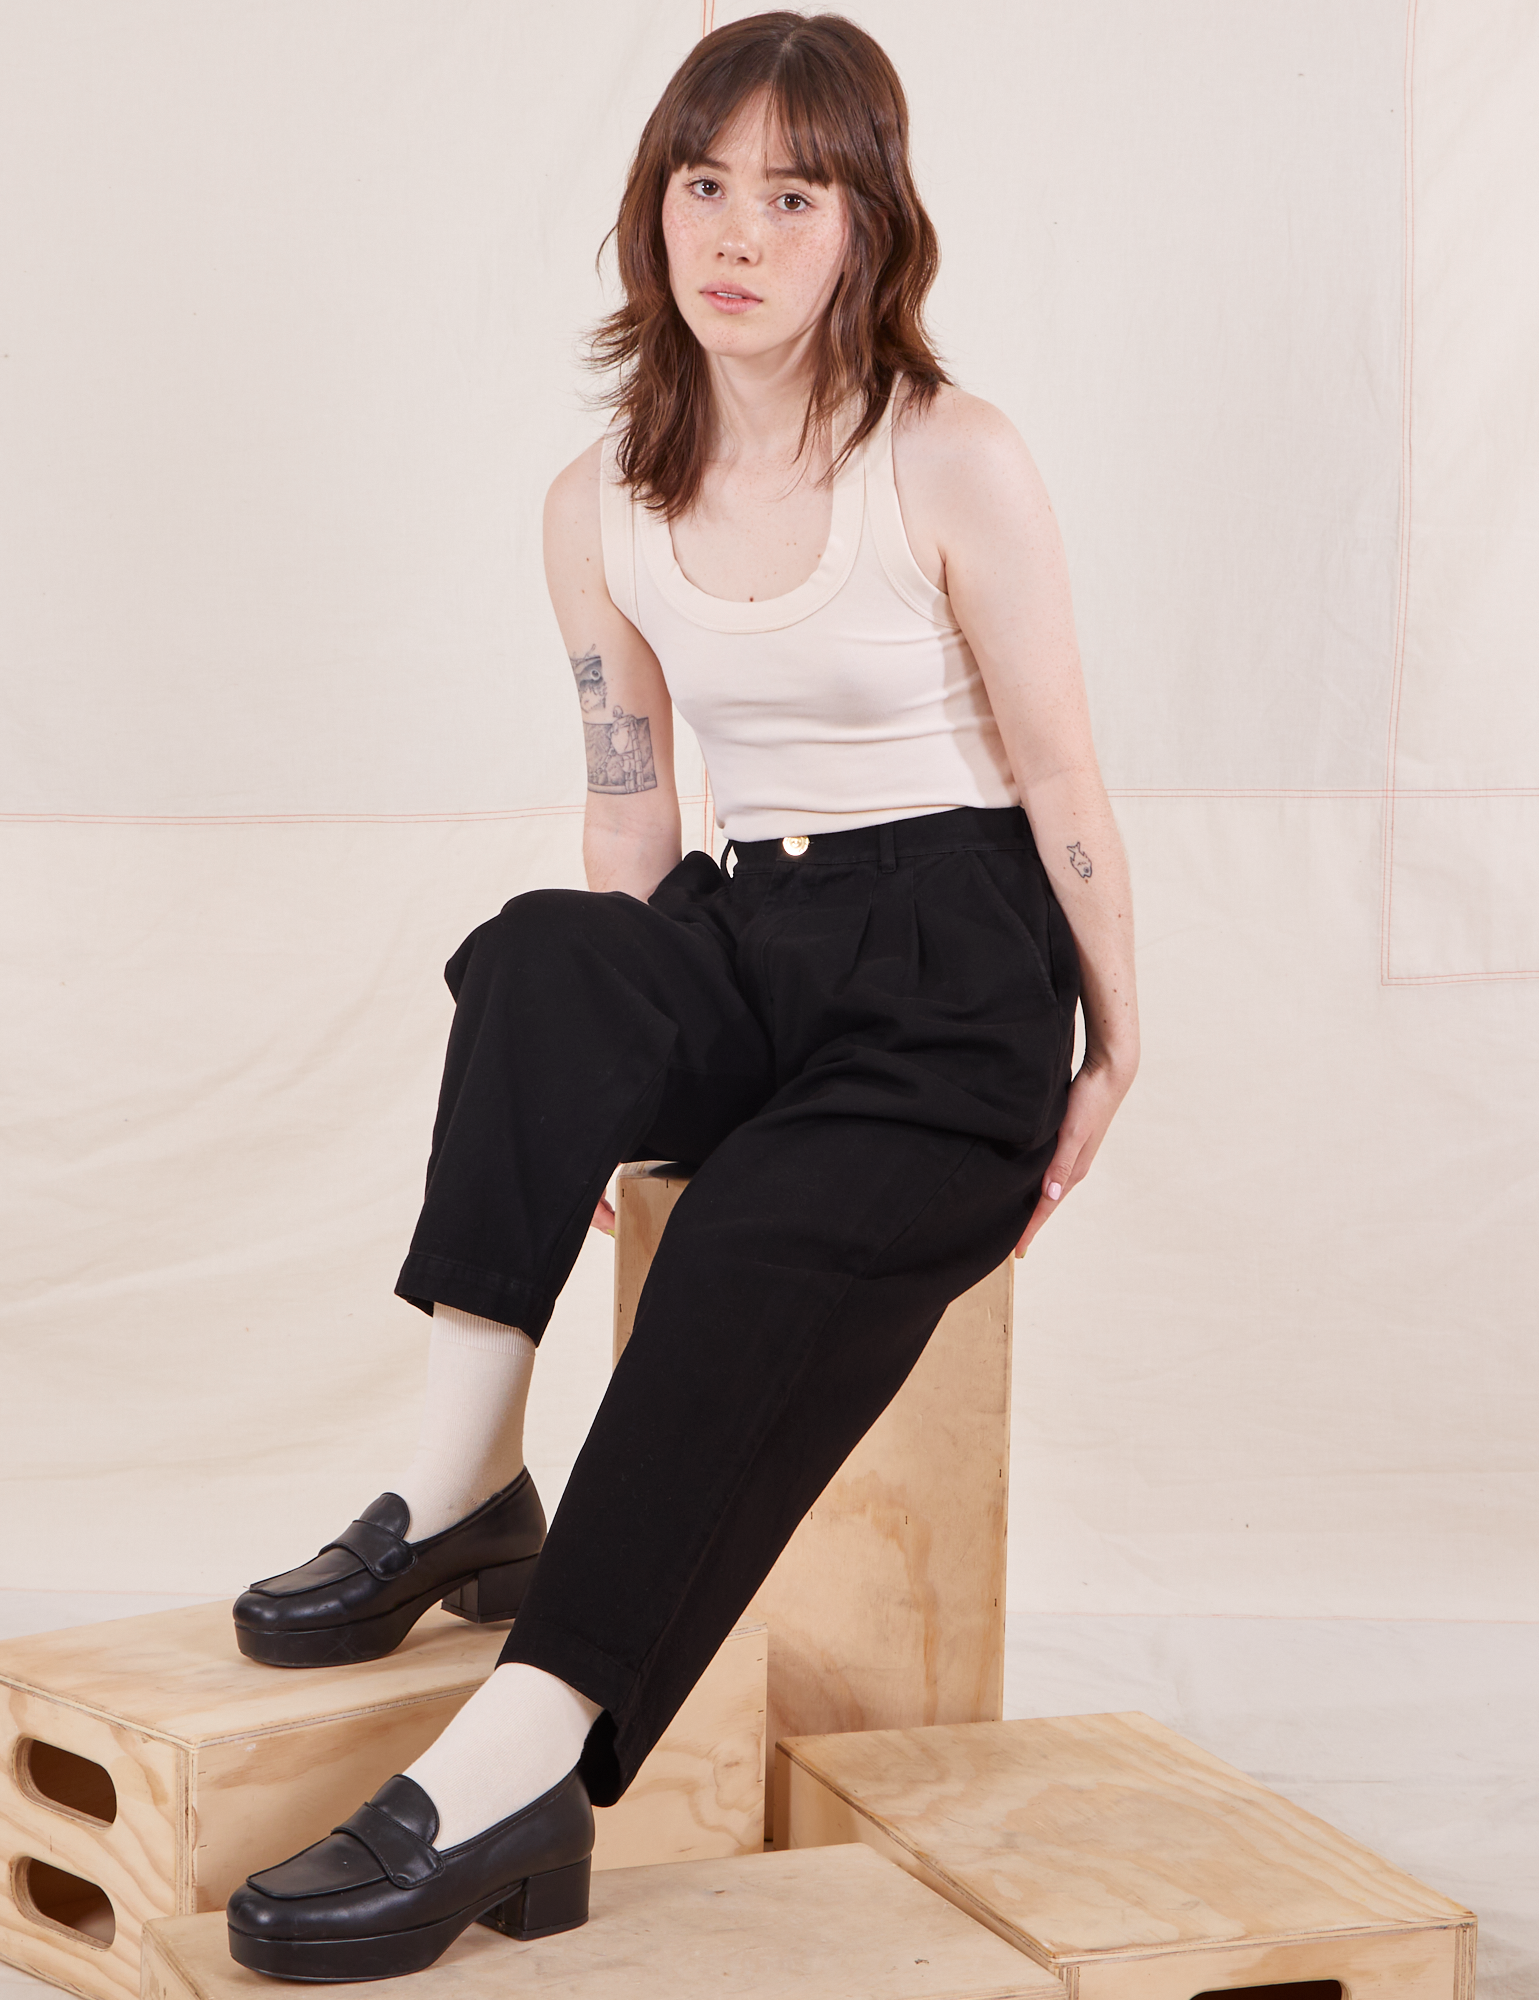 Hana is wearing Organic Trousers in Basic Black and vintage off-white Tank Top